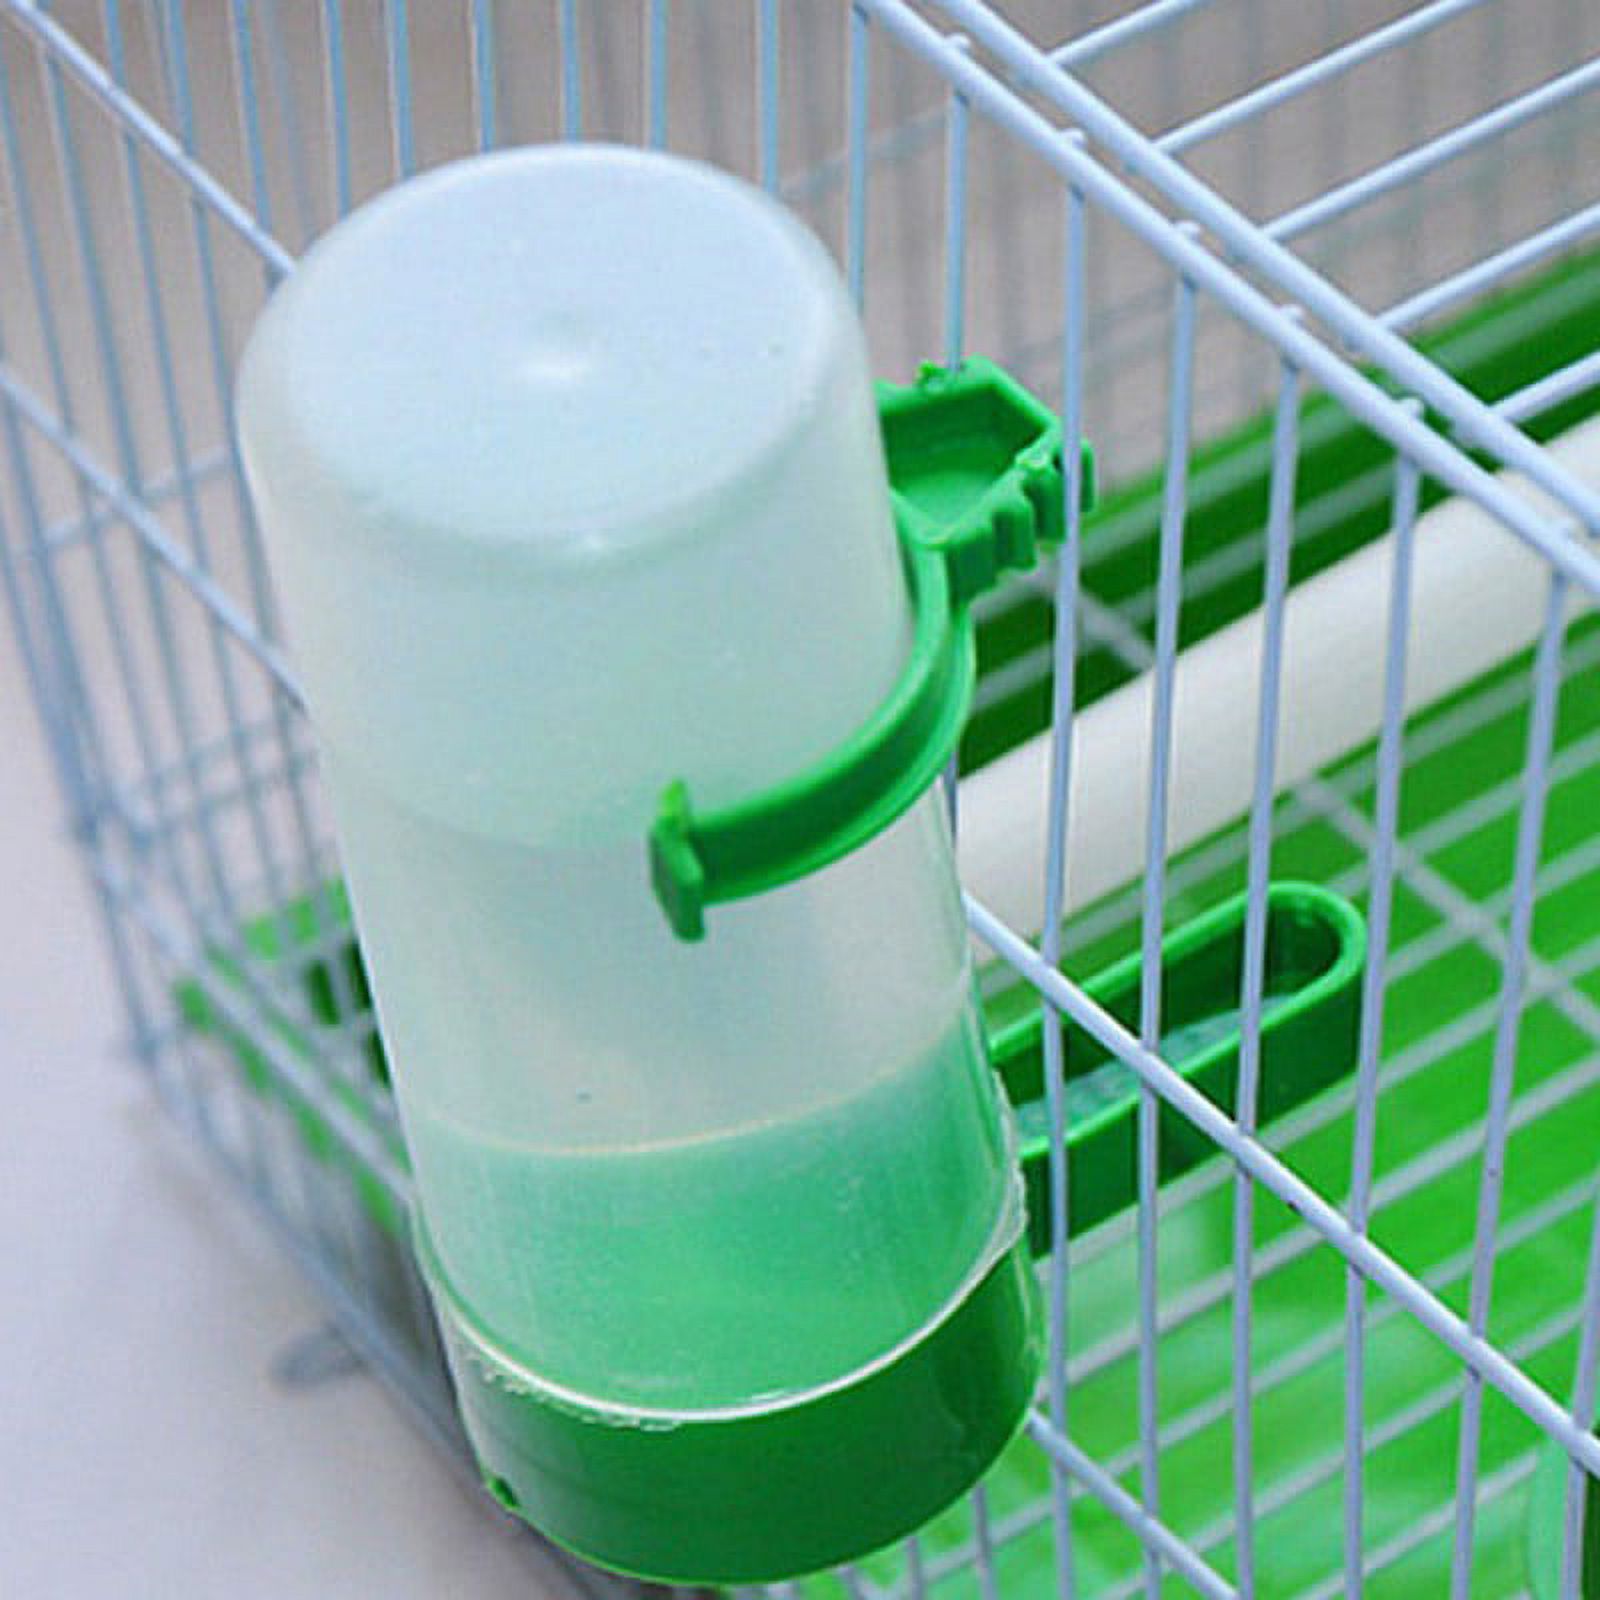 4PCS Plastic Pet Bird Drinker Feeder Water Bottle Cup For Cage Budgie Birds - image 5 of 5